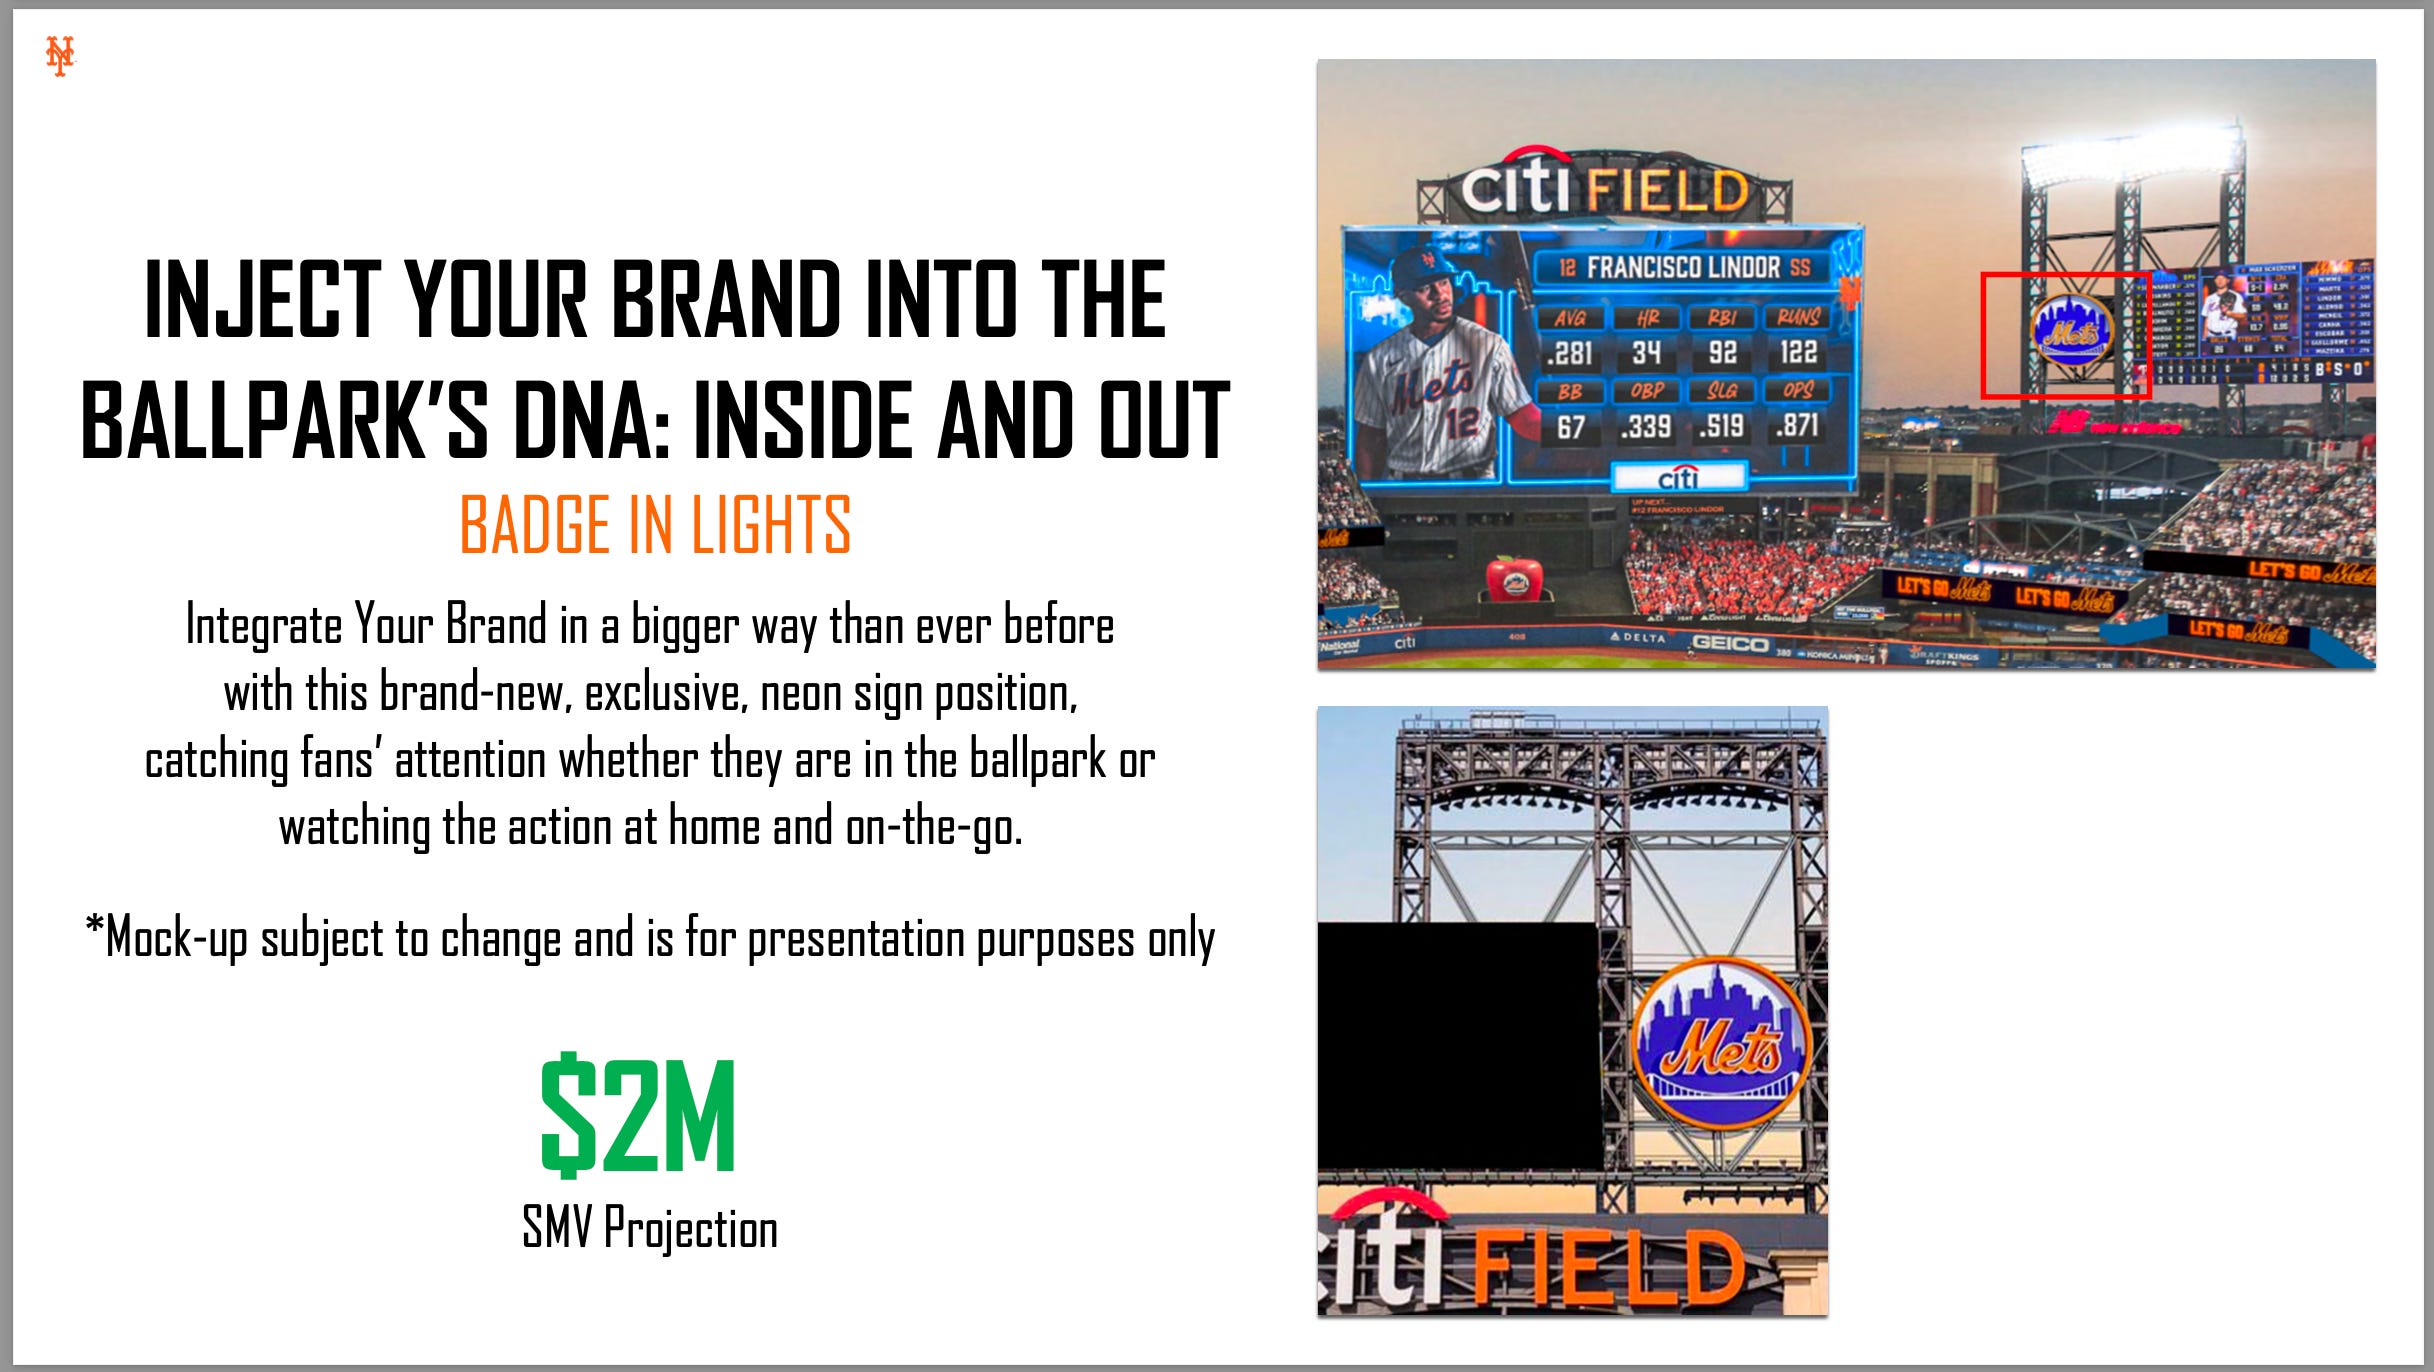 New York Mets go all out with million-dollar Super Bowl ad campaign to  establish brand identity